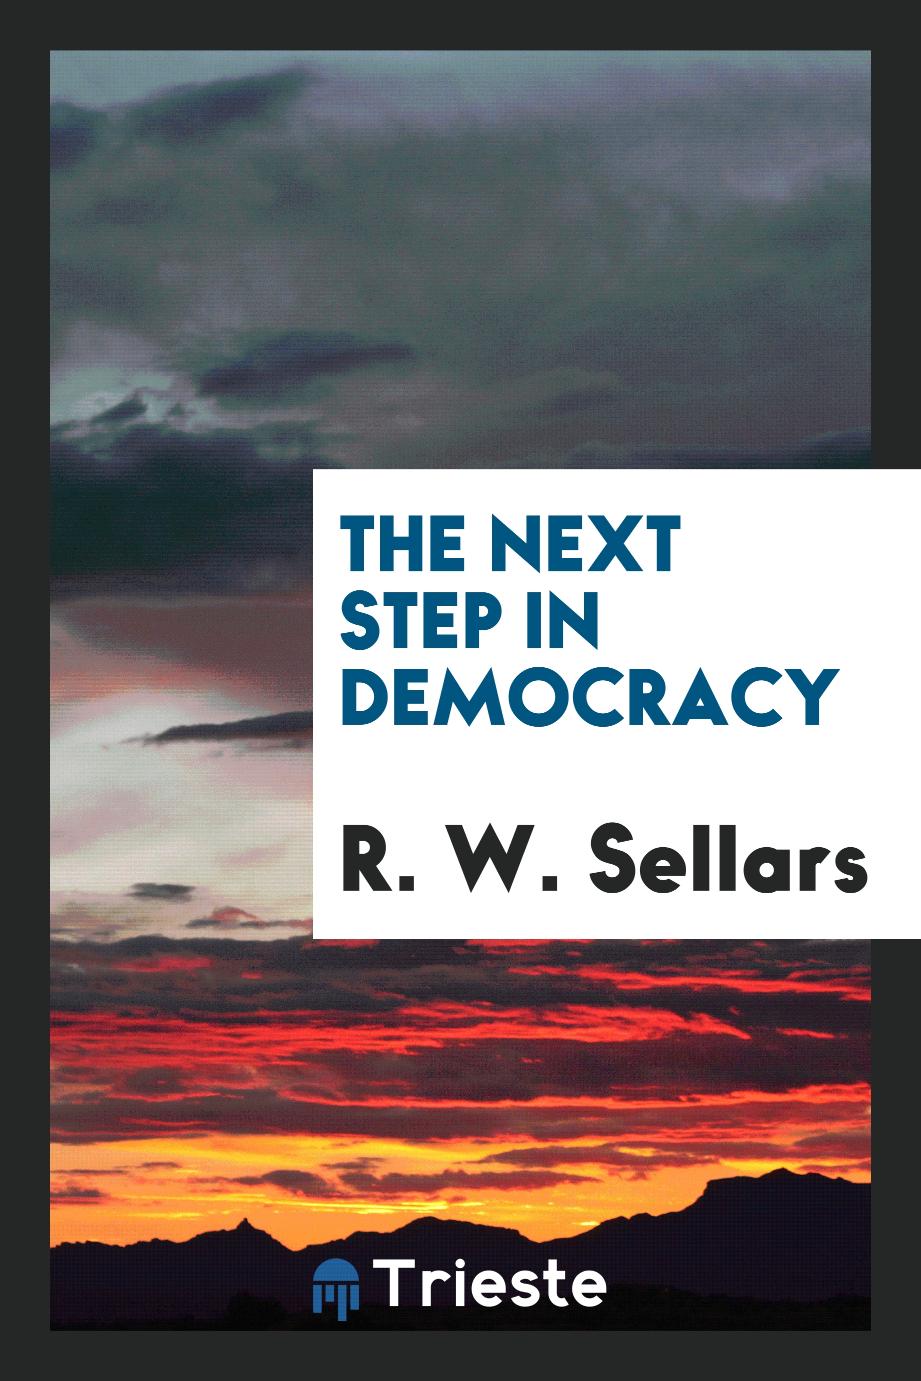 The next step in democracy